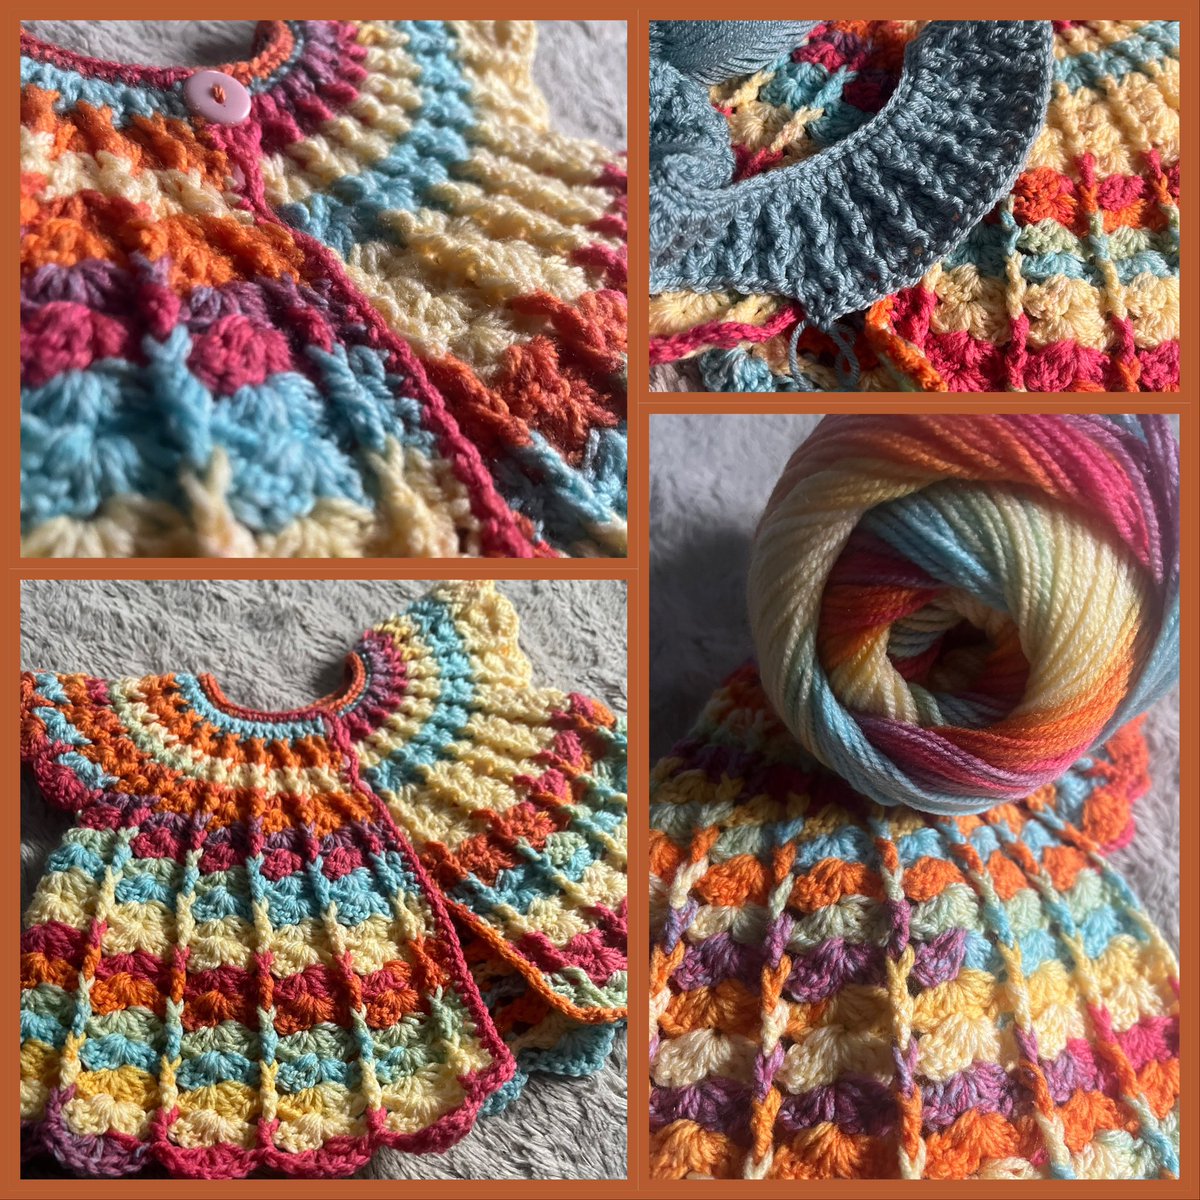 I made this lovely little rainbow newborn baby cardigan  🥰🌈 
Now making a little blue one 🩵💙  #ukcraftershour #MHHSBD #UKMakers #Craftbizparty #wip #crochet #babycrochet #toocute #yarn #magic 
etsy.com/shop/DWCrochet…